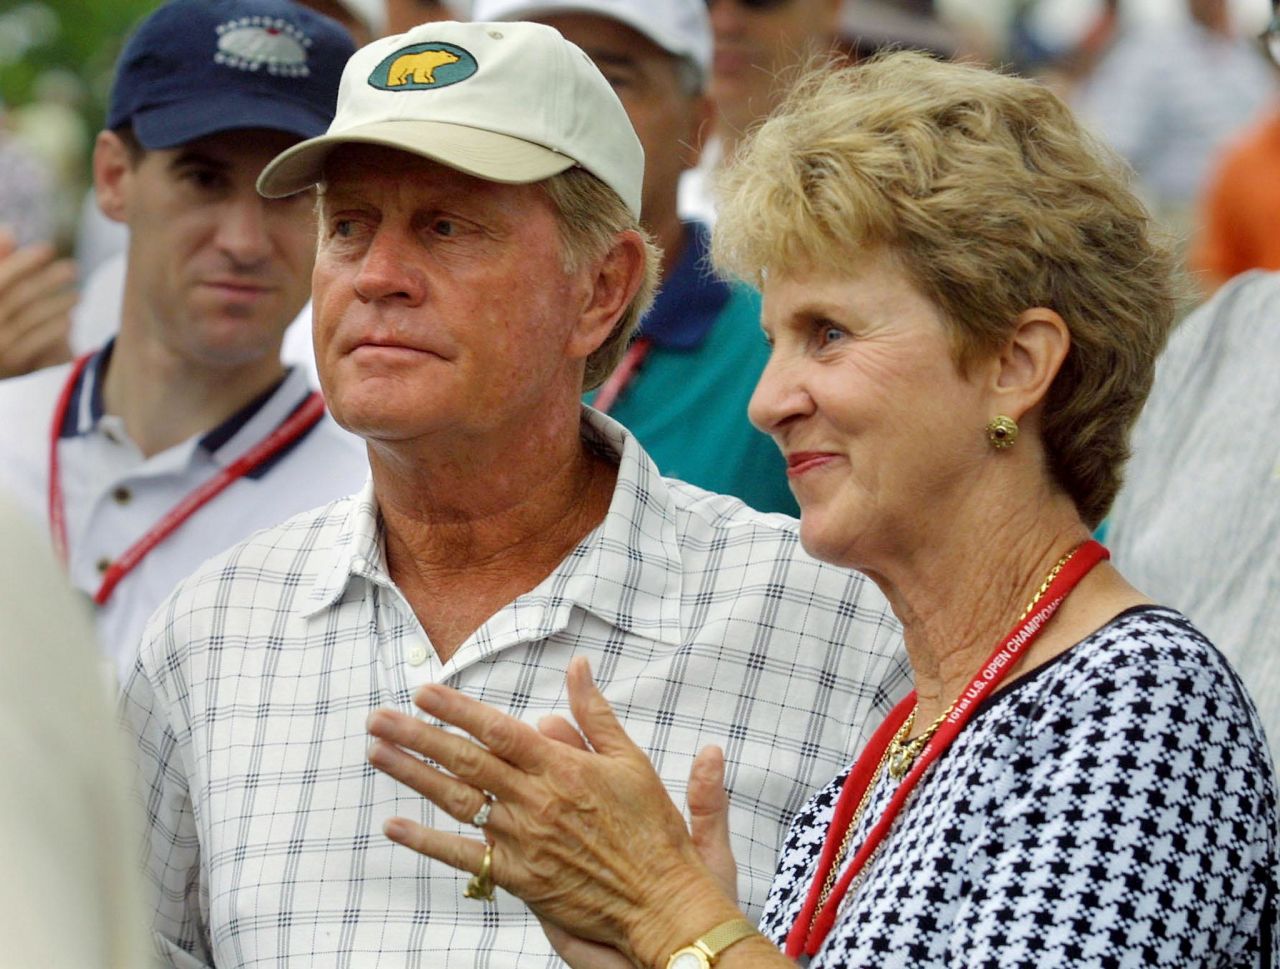 Nicklaus and his wife Barbara started children's charity work after their infant daughter was saved from choking to death by a Columbus hospital. Here they watch their son Gary competing in the 2001 U.S. Open golf tournament.